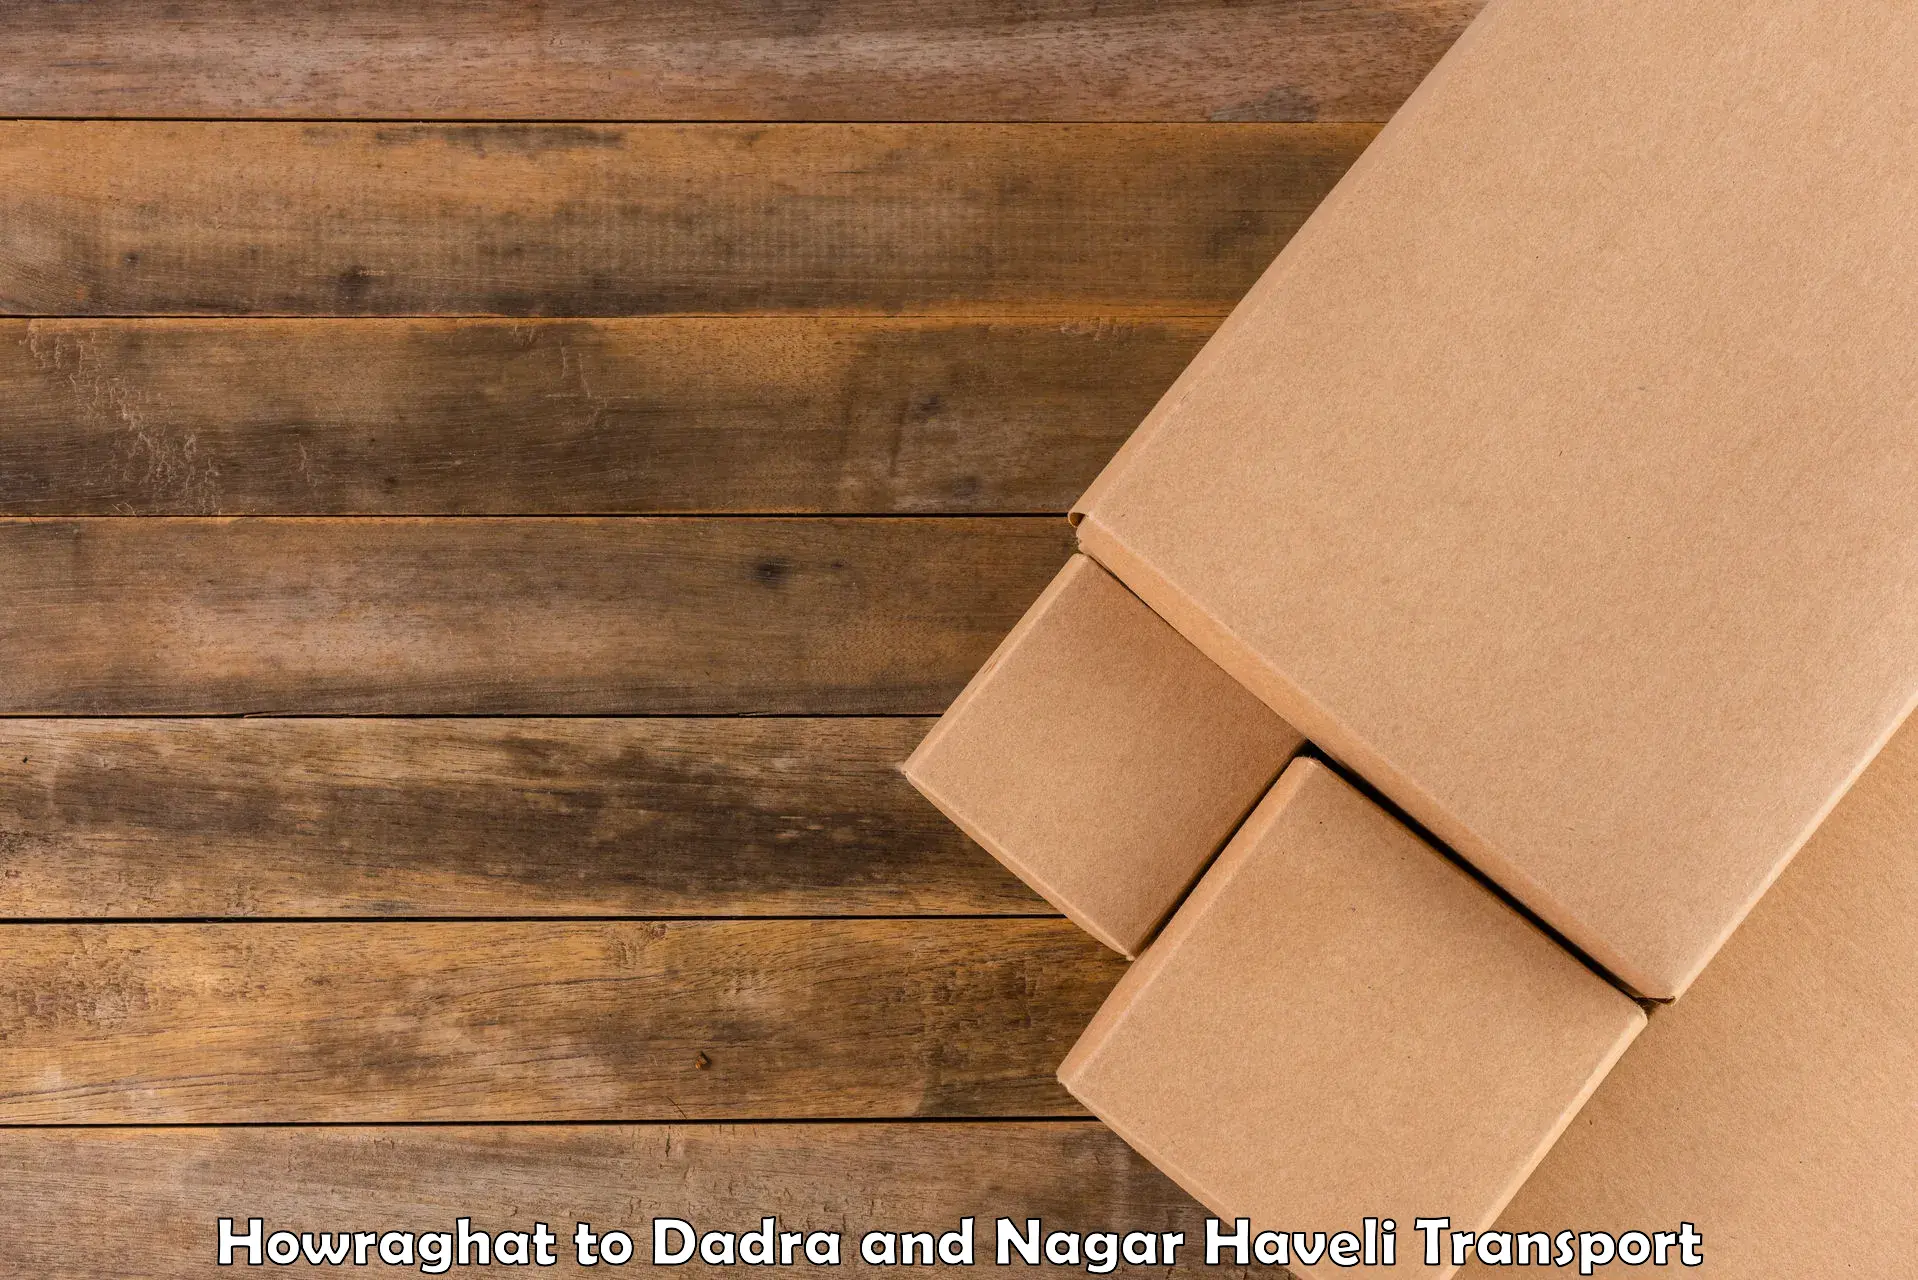 Cargo train transport services Howraghat to Dadra and Nagar Haveli